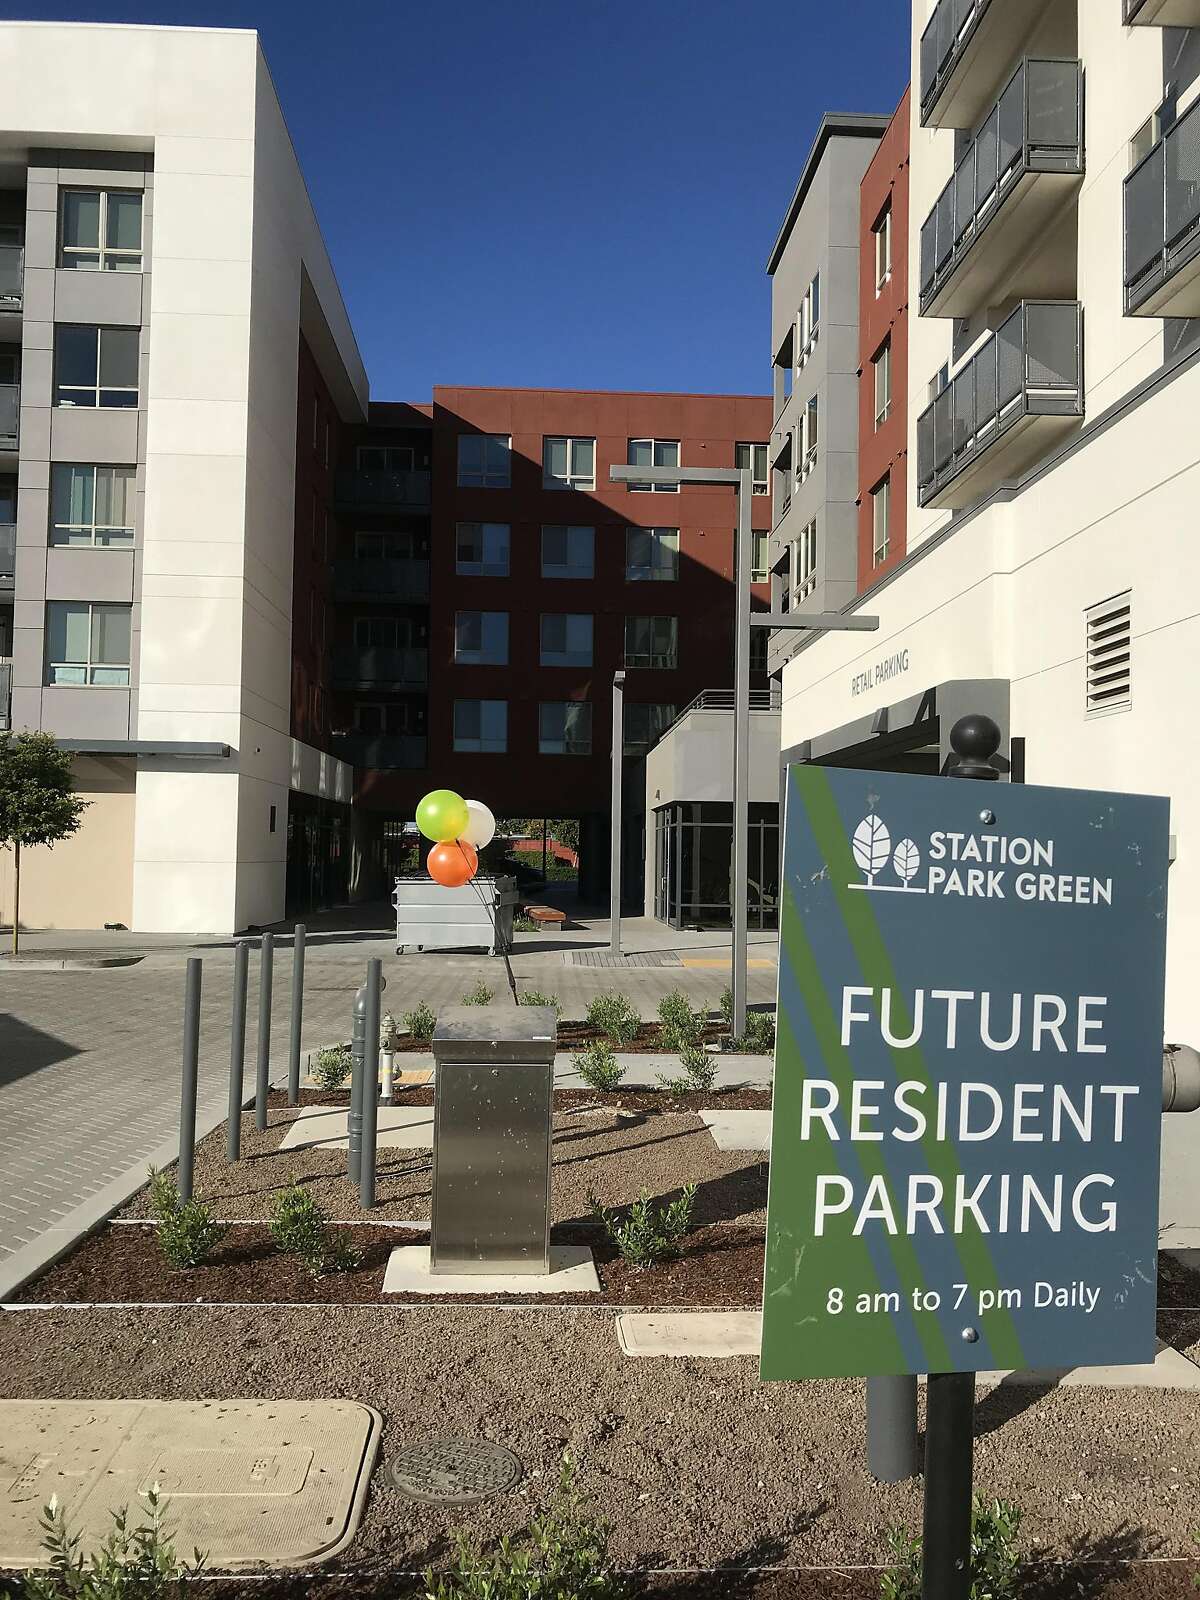 Station Park Green is a new apartment complex developed by Essex Property Trust, near its headquarters in San Mateo. August 3, 2018. Photo by Kathleen Pender/The Chronicle.